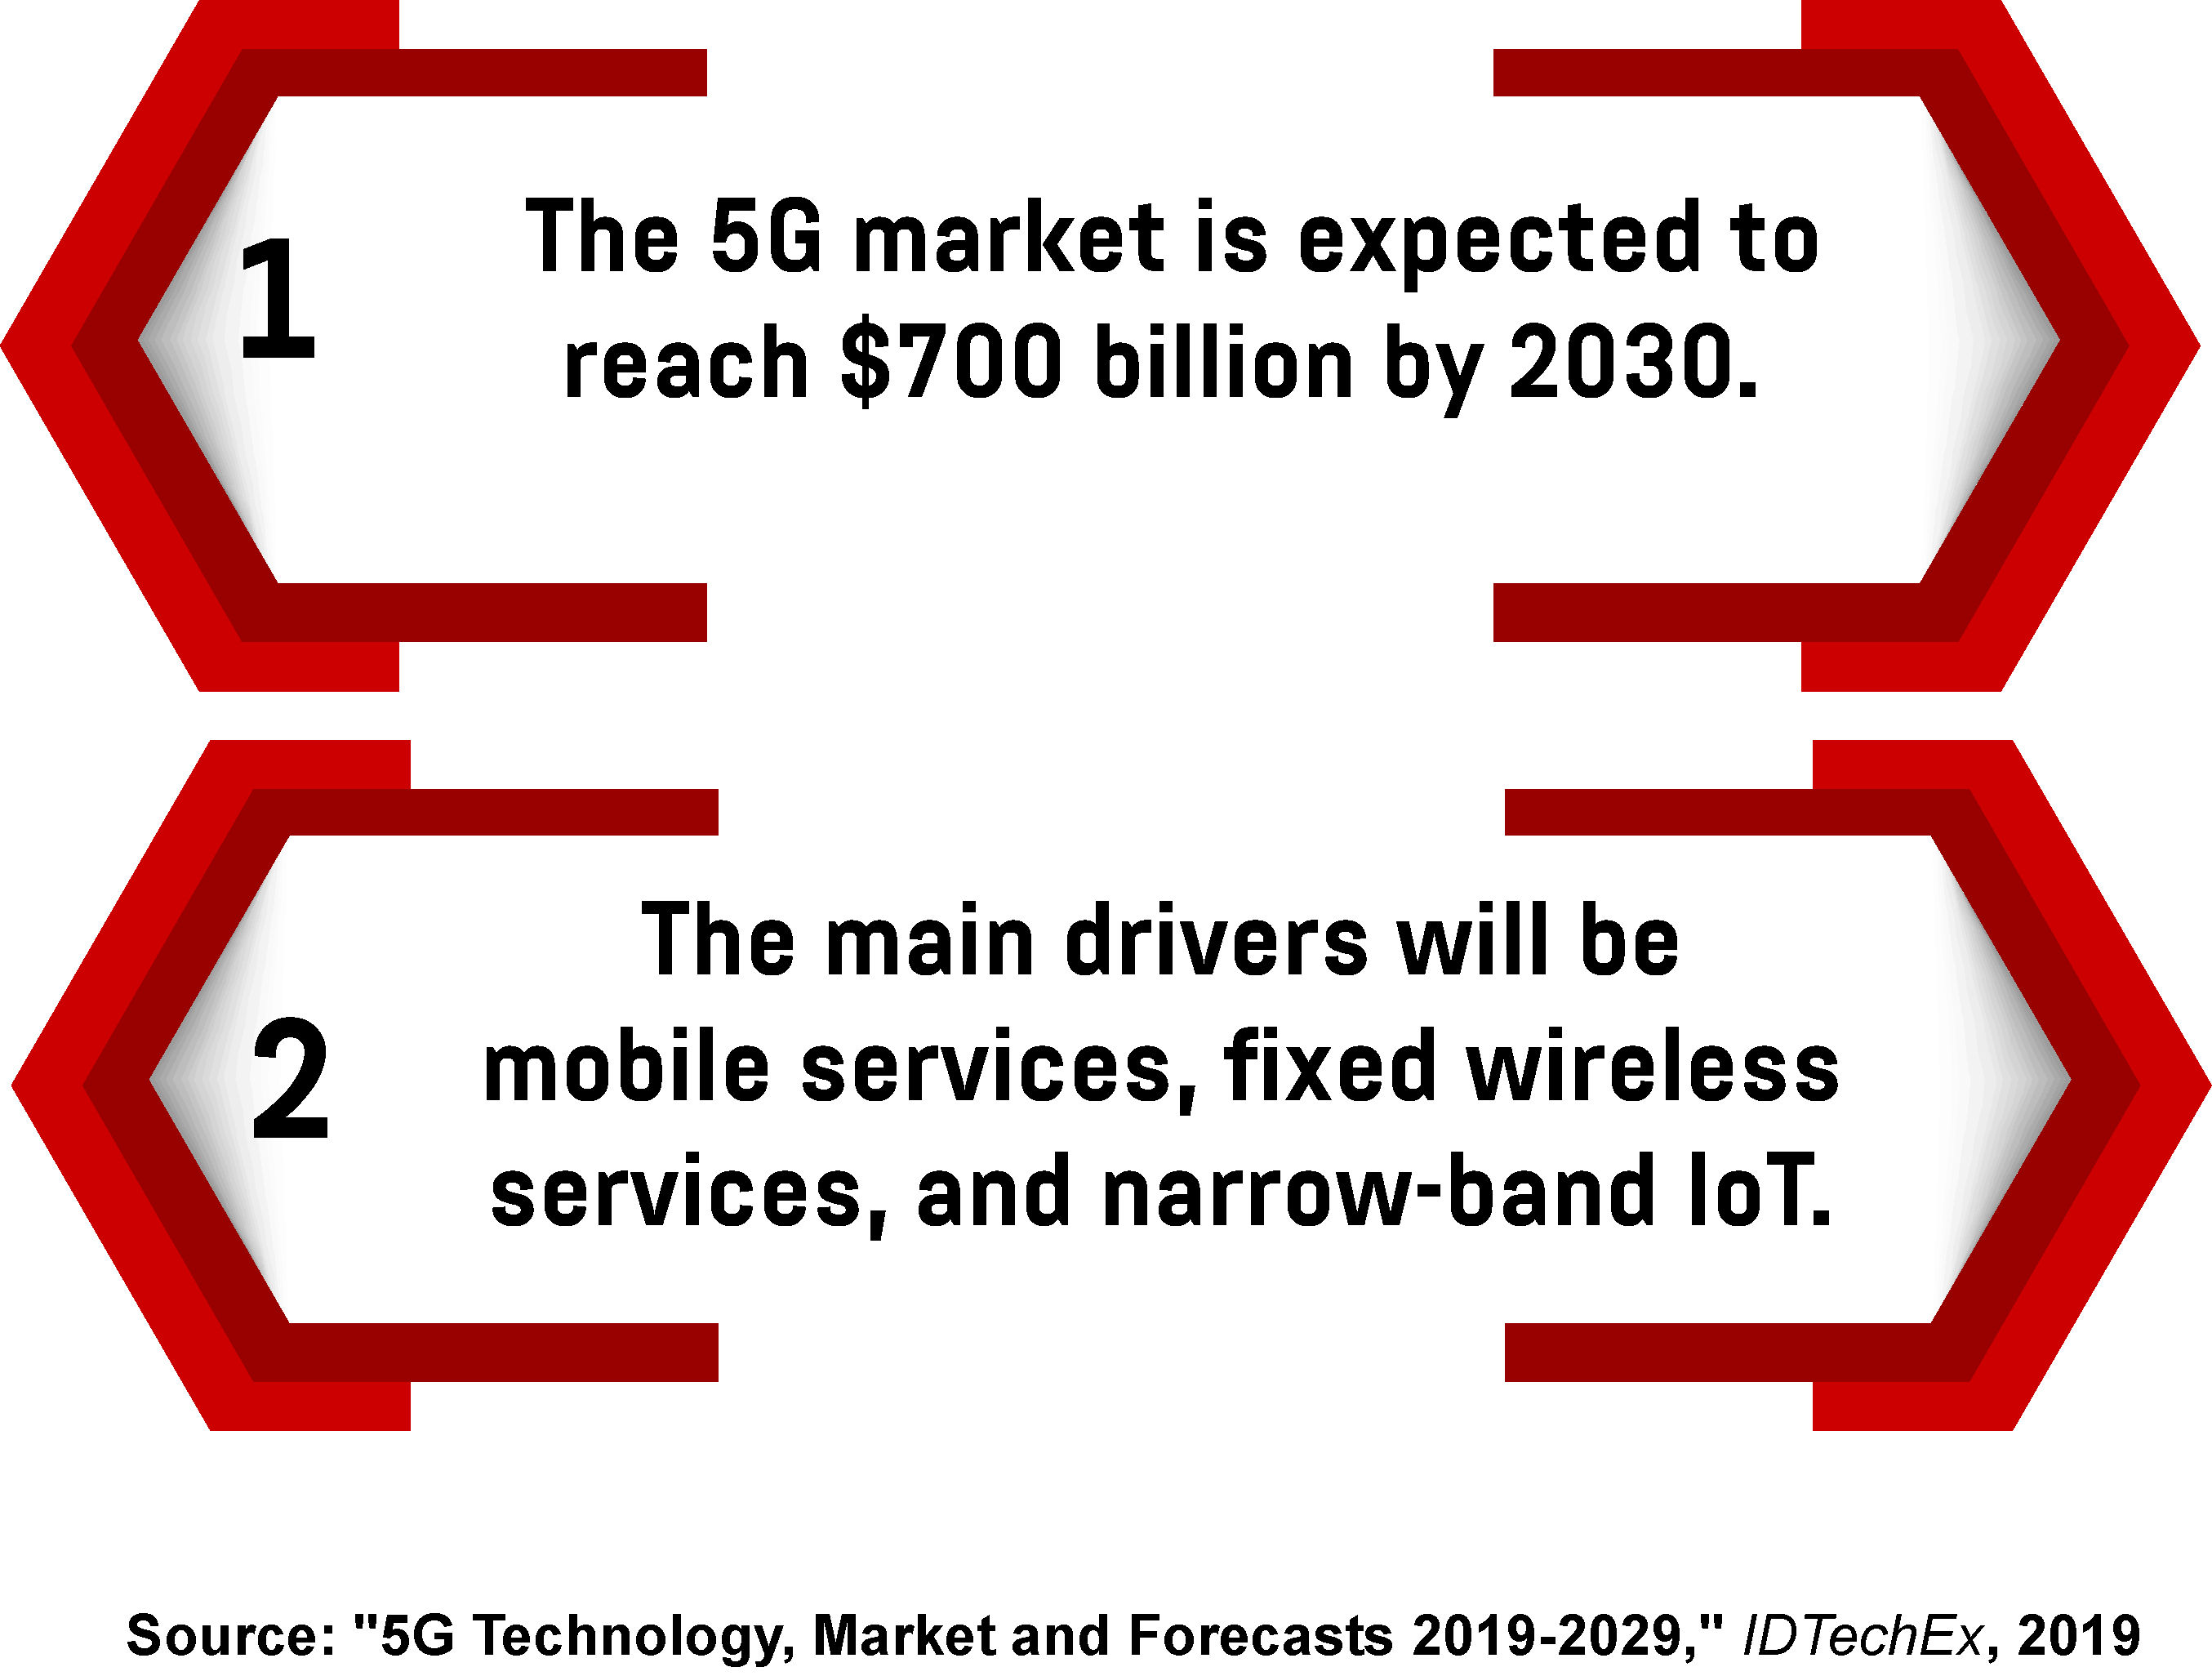 An infographic showing the expected size of the 5G market by 2030 and the main drivers of growth.